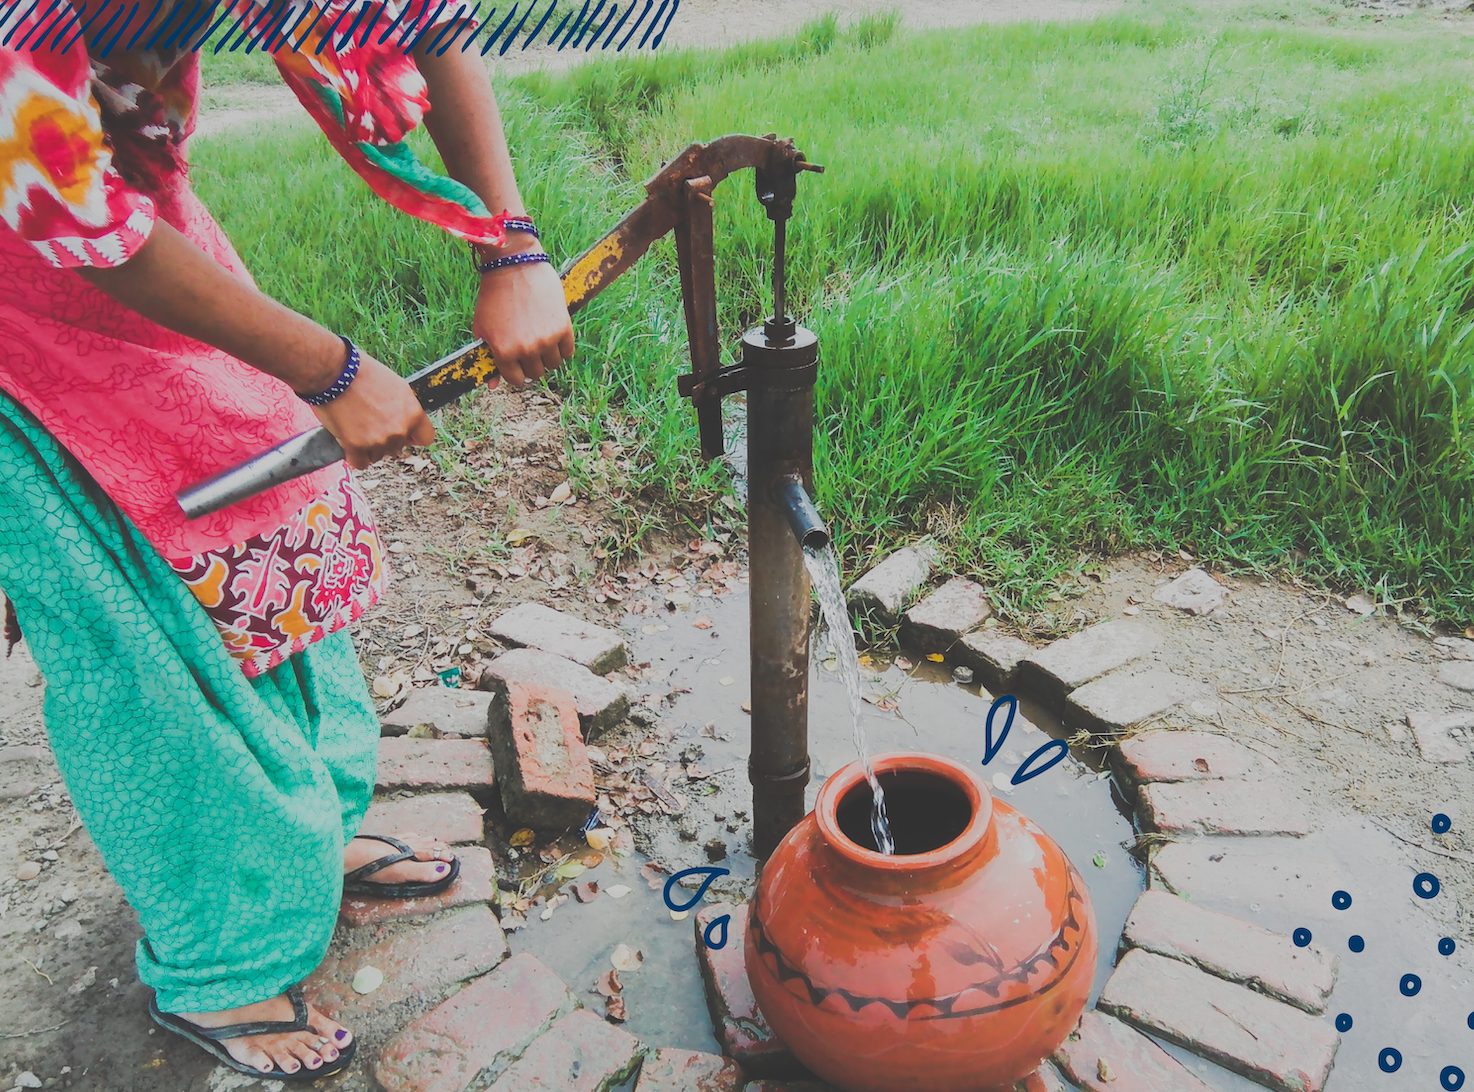 Woman fetching water from water pump